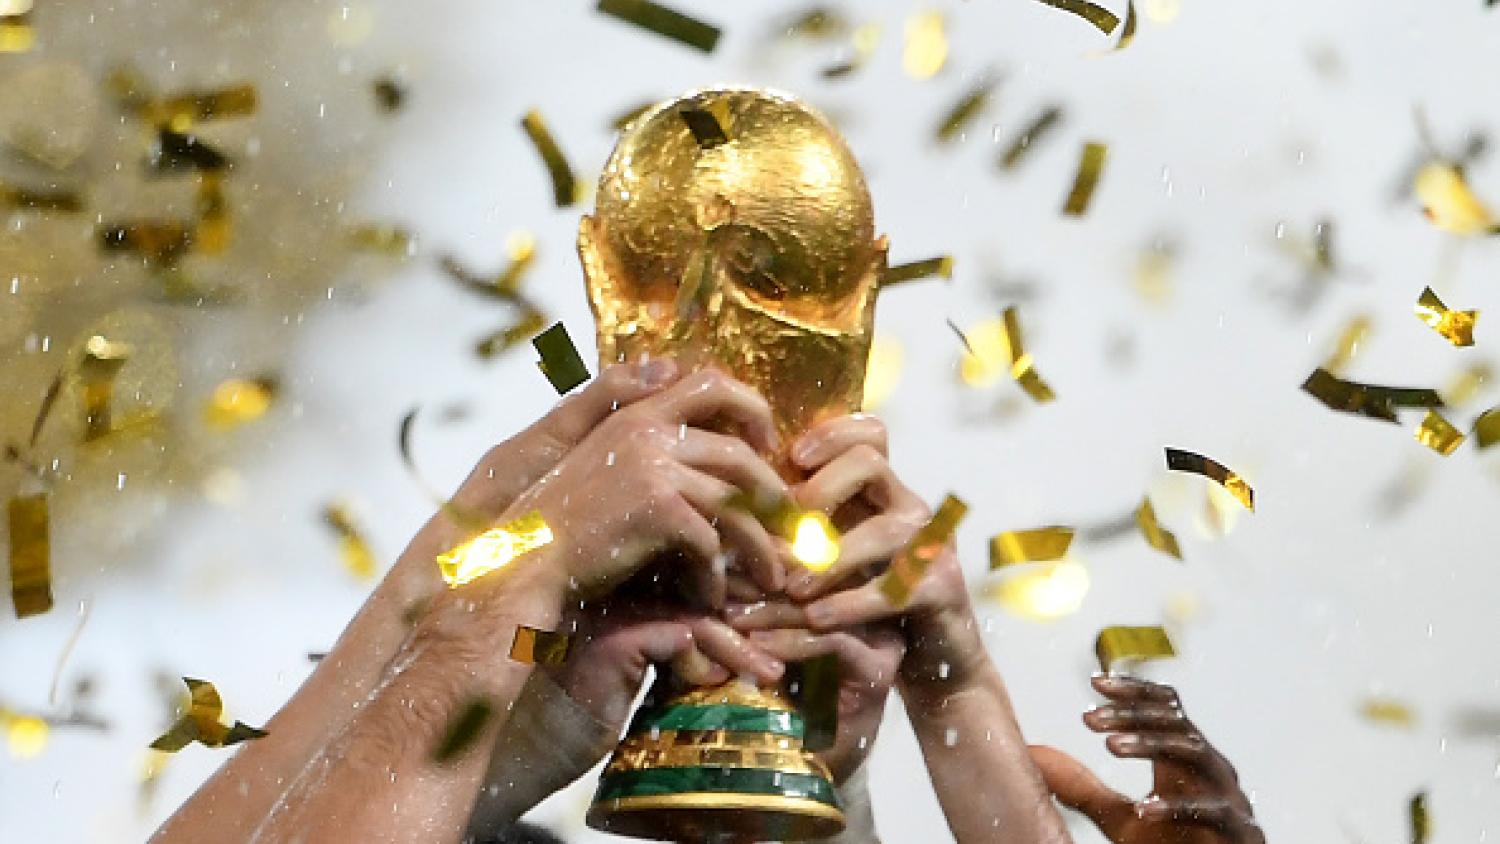 The top 10 most expensive soccer trophies in the world